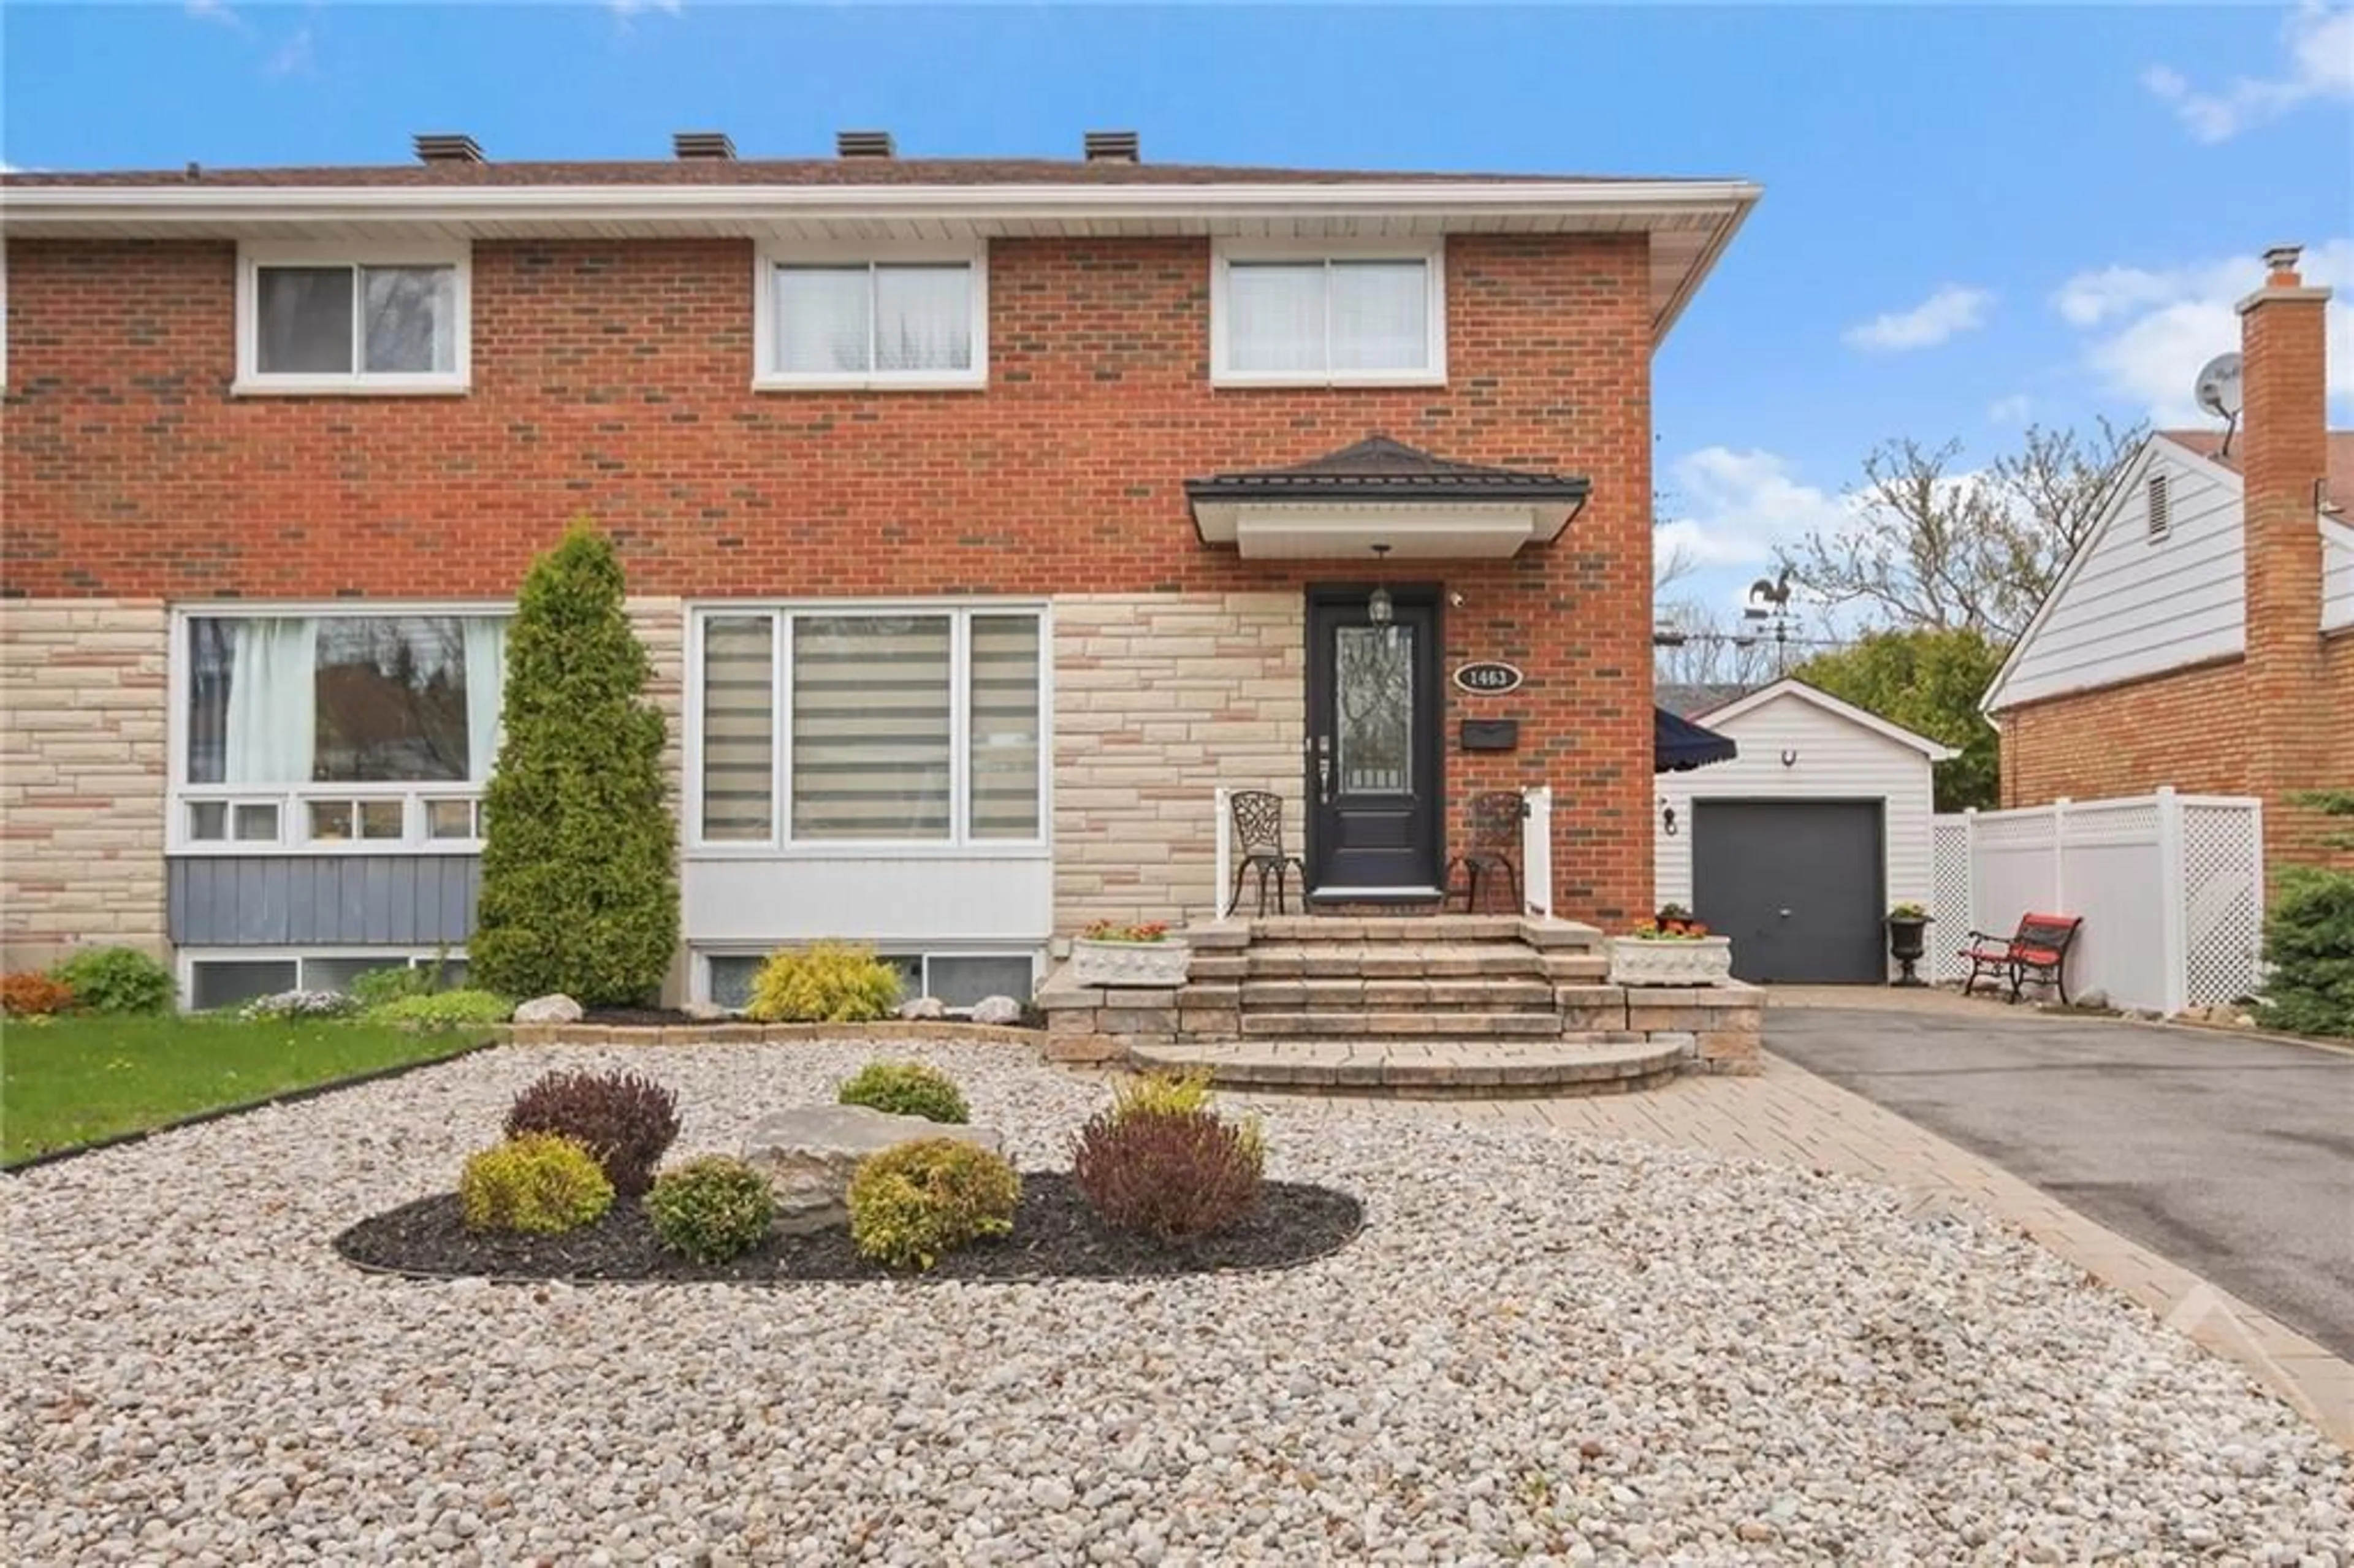 Home with brick exterior material for 1463 RAVEN Ave, Ottawa Ontario K1Z 7Y6